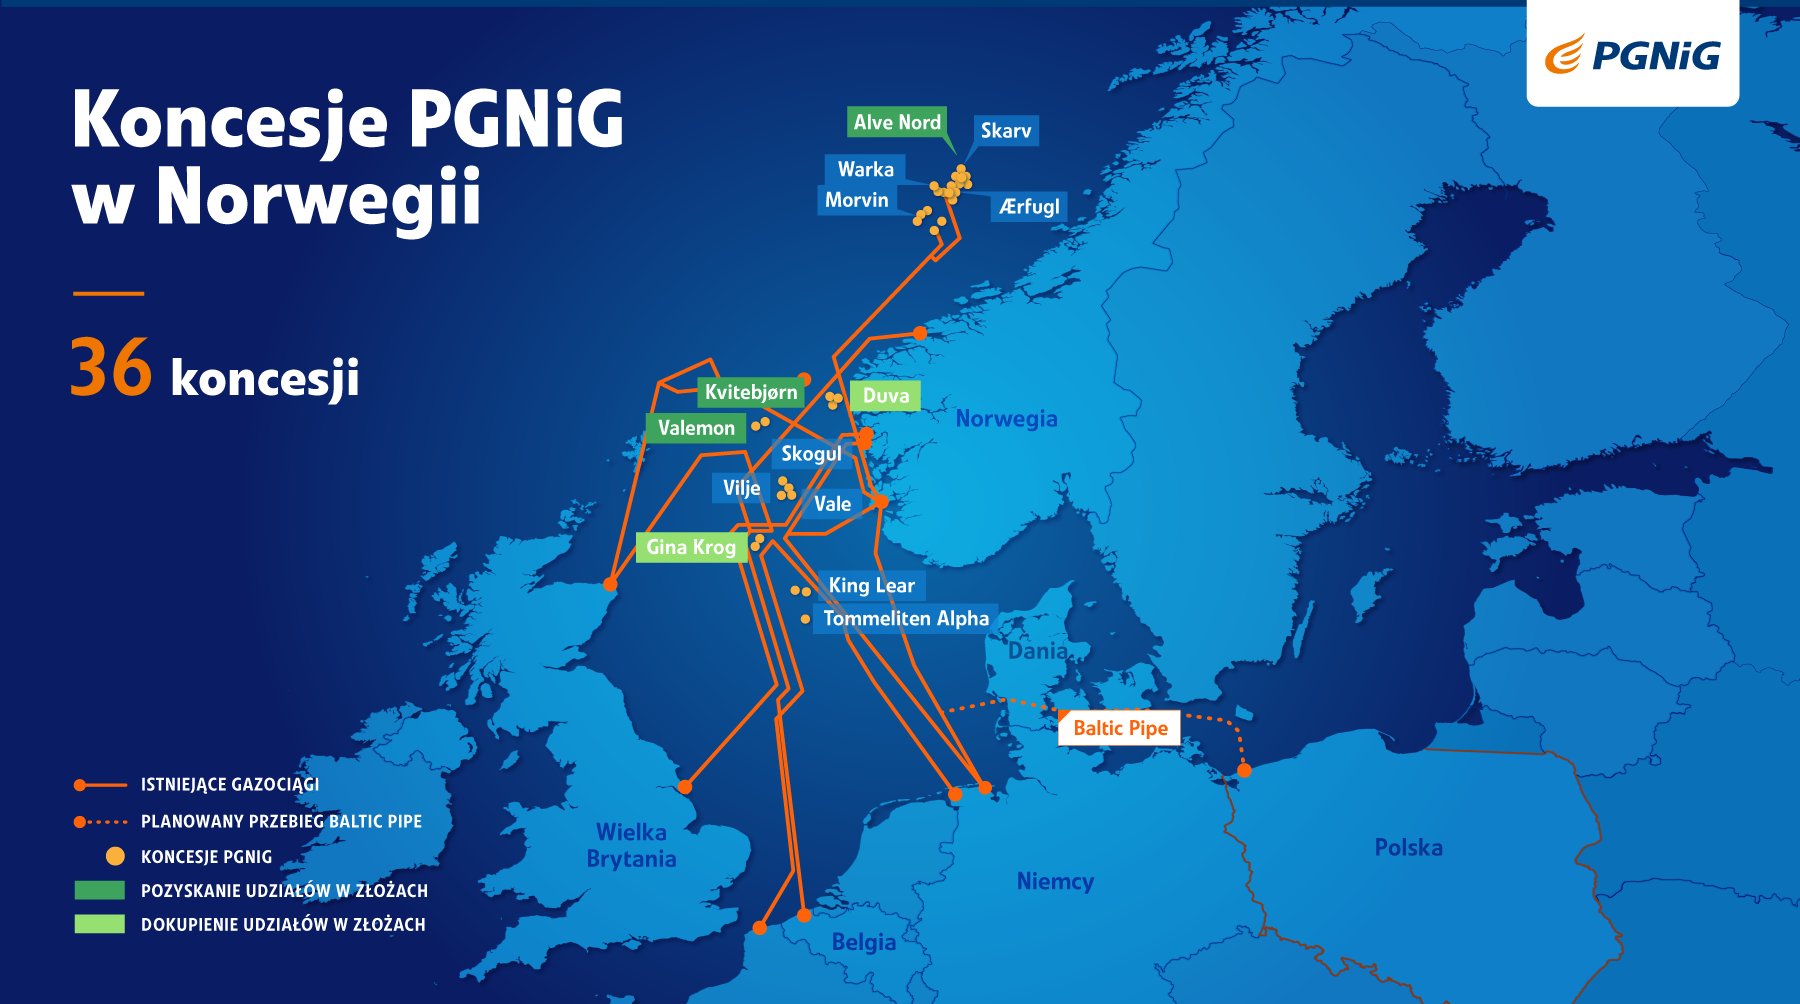 PGNiG to buy all assets of INEOS E&P Norge - MarinePoland.com